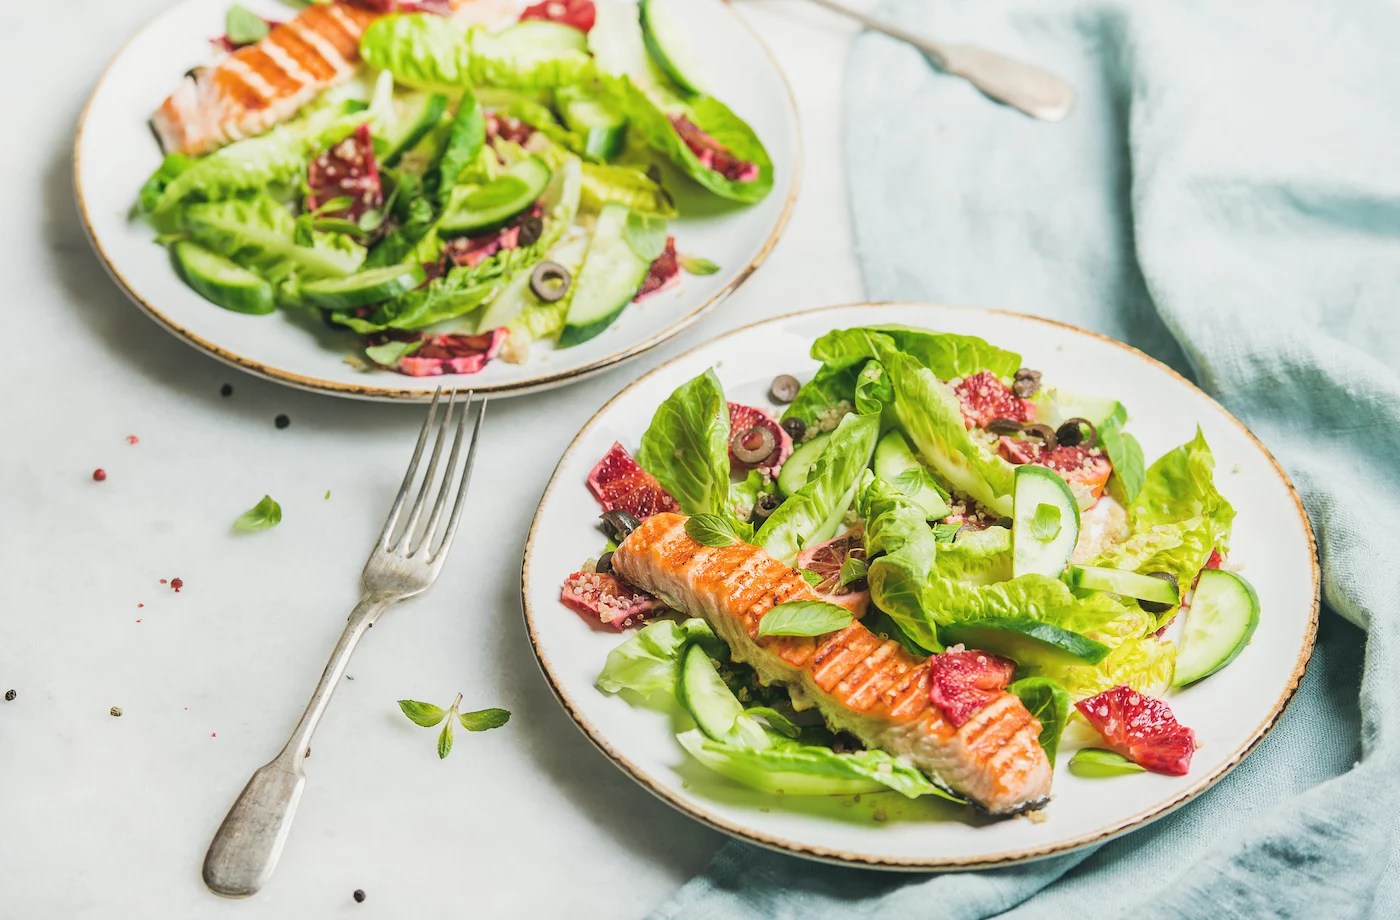 70 Low-Carb Dinner Recipes That Are Easy and Tasty - PureWow